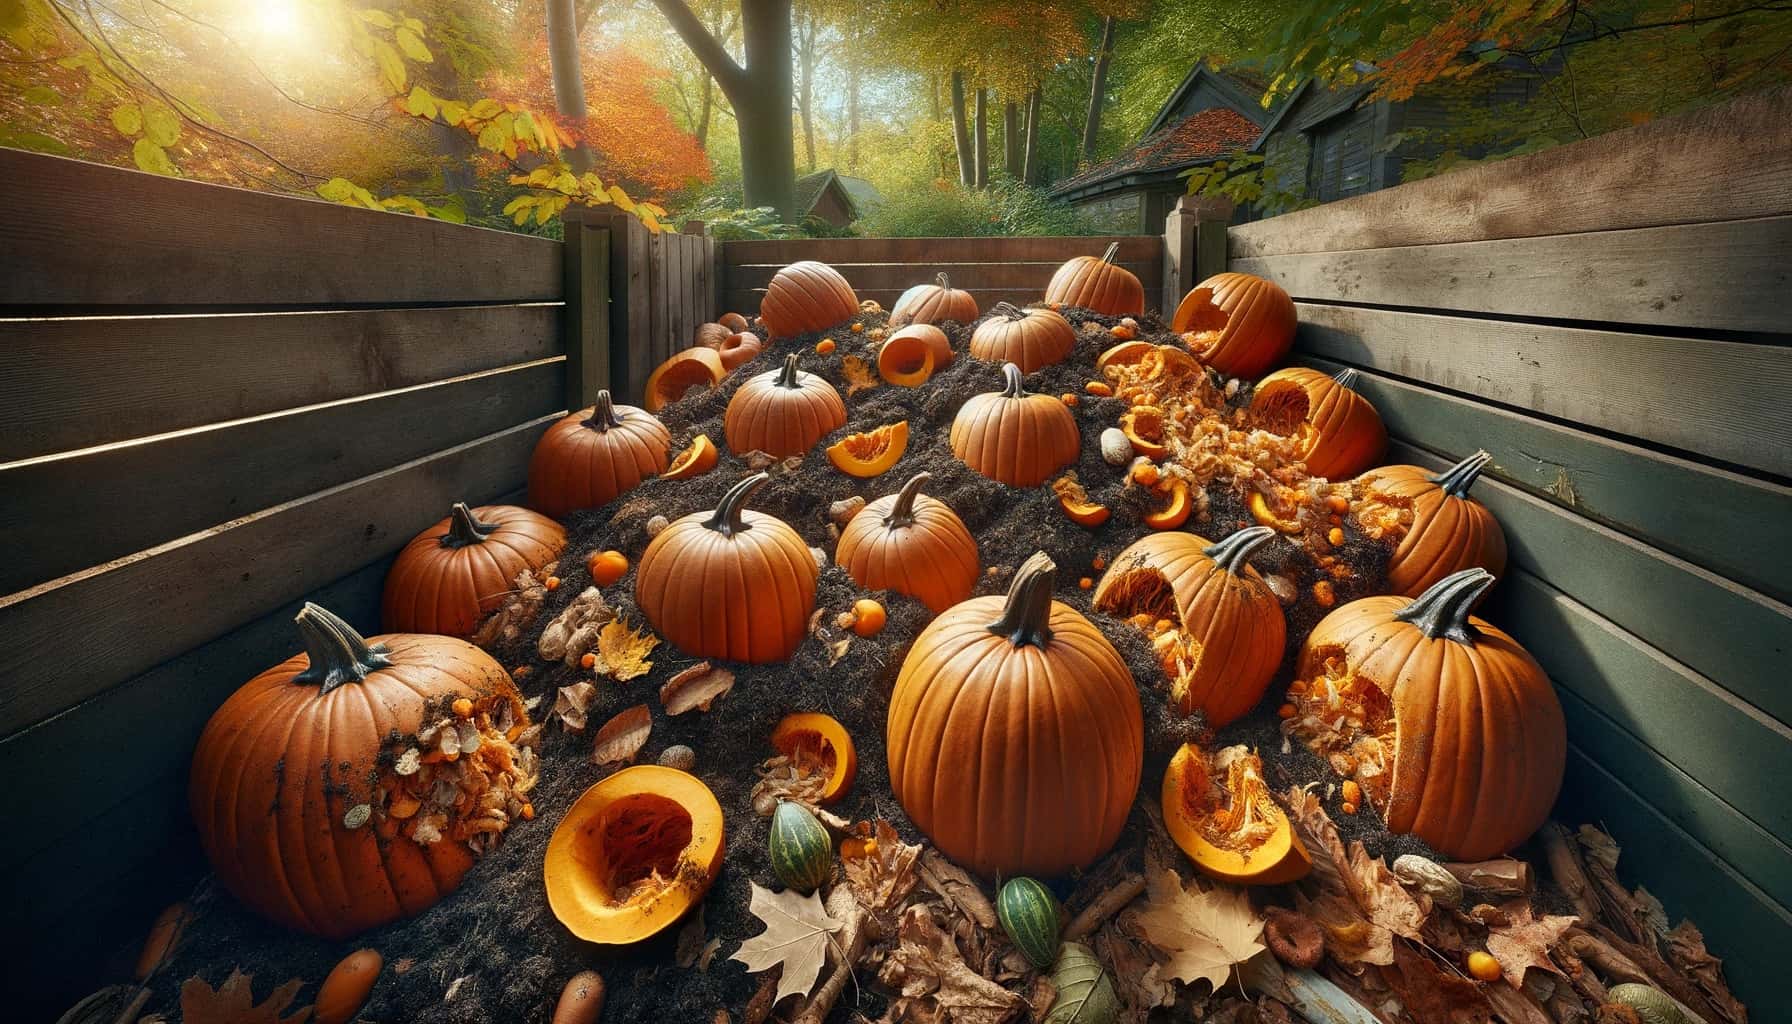 A pile of pumpkins in a wooded area.